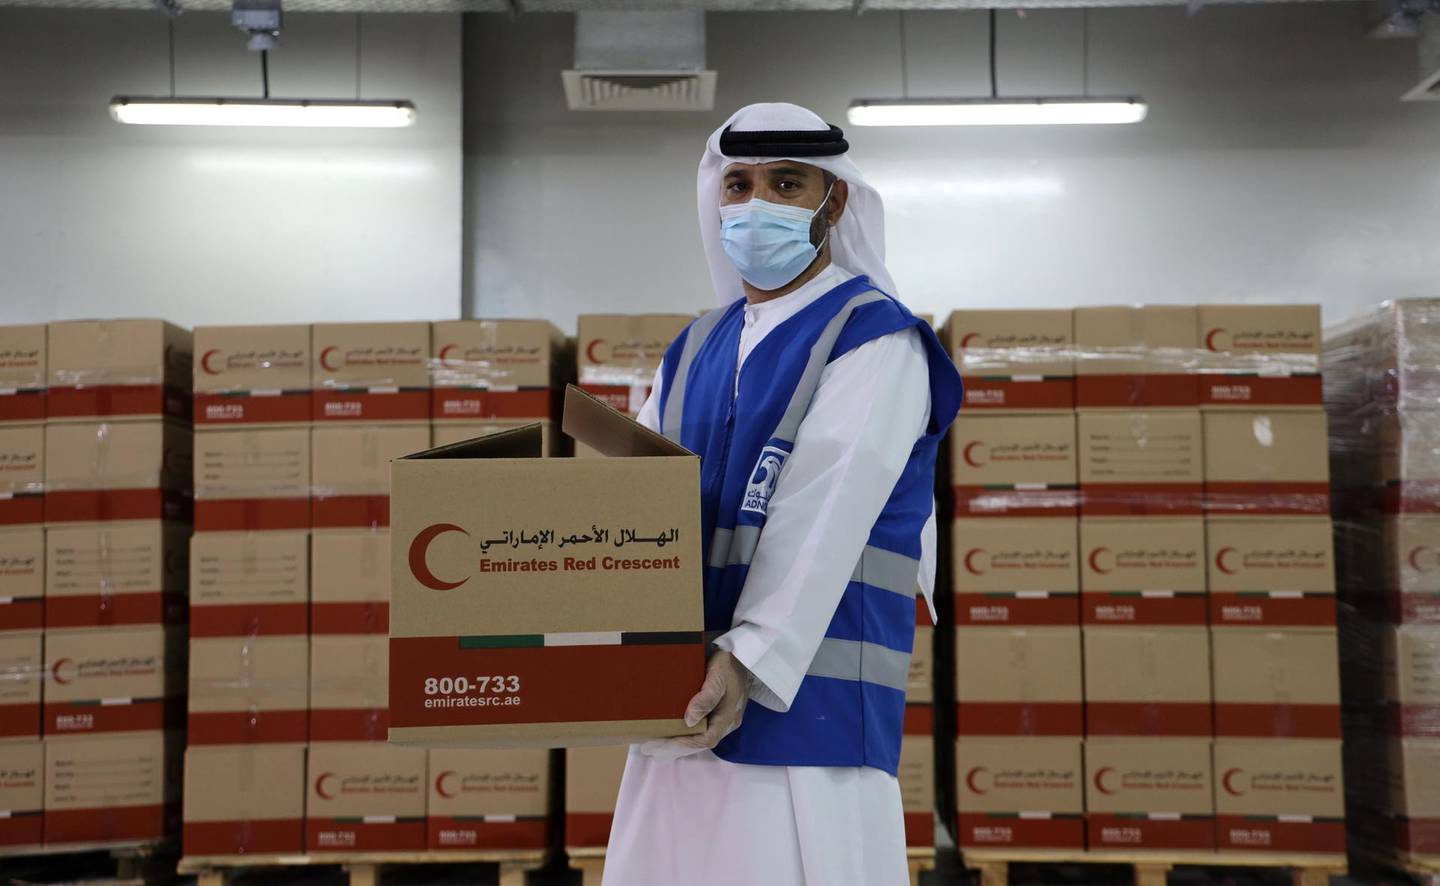 Abu Dhabi, UAE – May 22, 2020: Employees of the Abu Dhabi National Oil Company (ADNOC) have raised AED 1 million to support UAE communities during the Holy Month of Ramadan, in partnership with Emirates Red Crescent (ERC), as part of ADNOC’s annual Ramadan initiative. Courtesy Adnoc